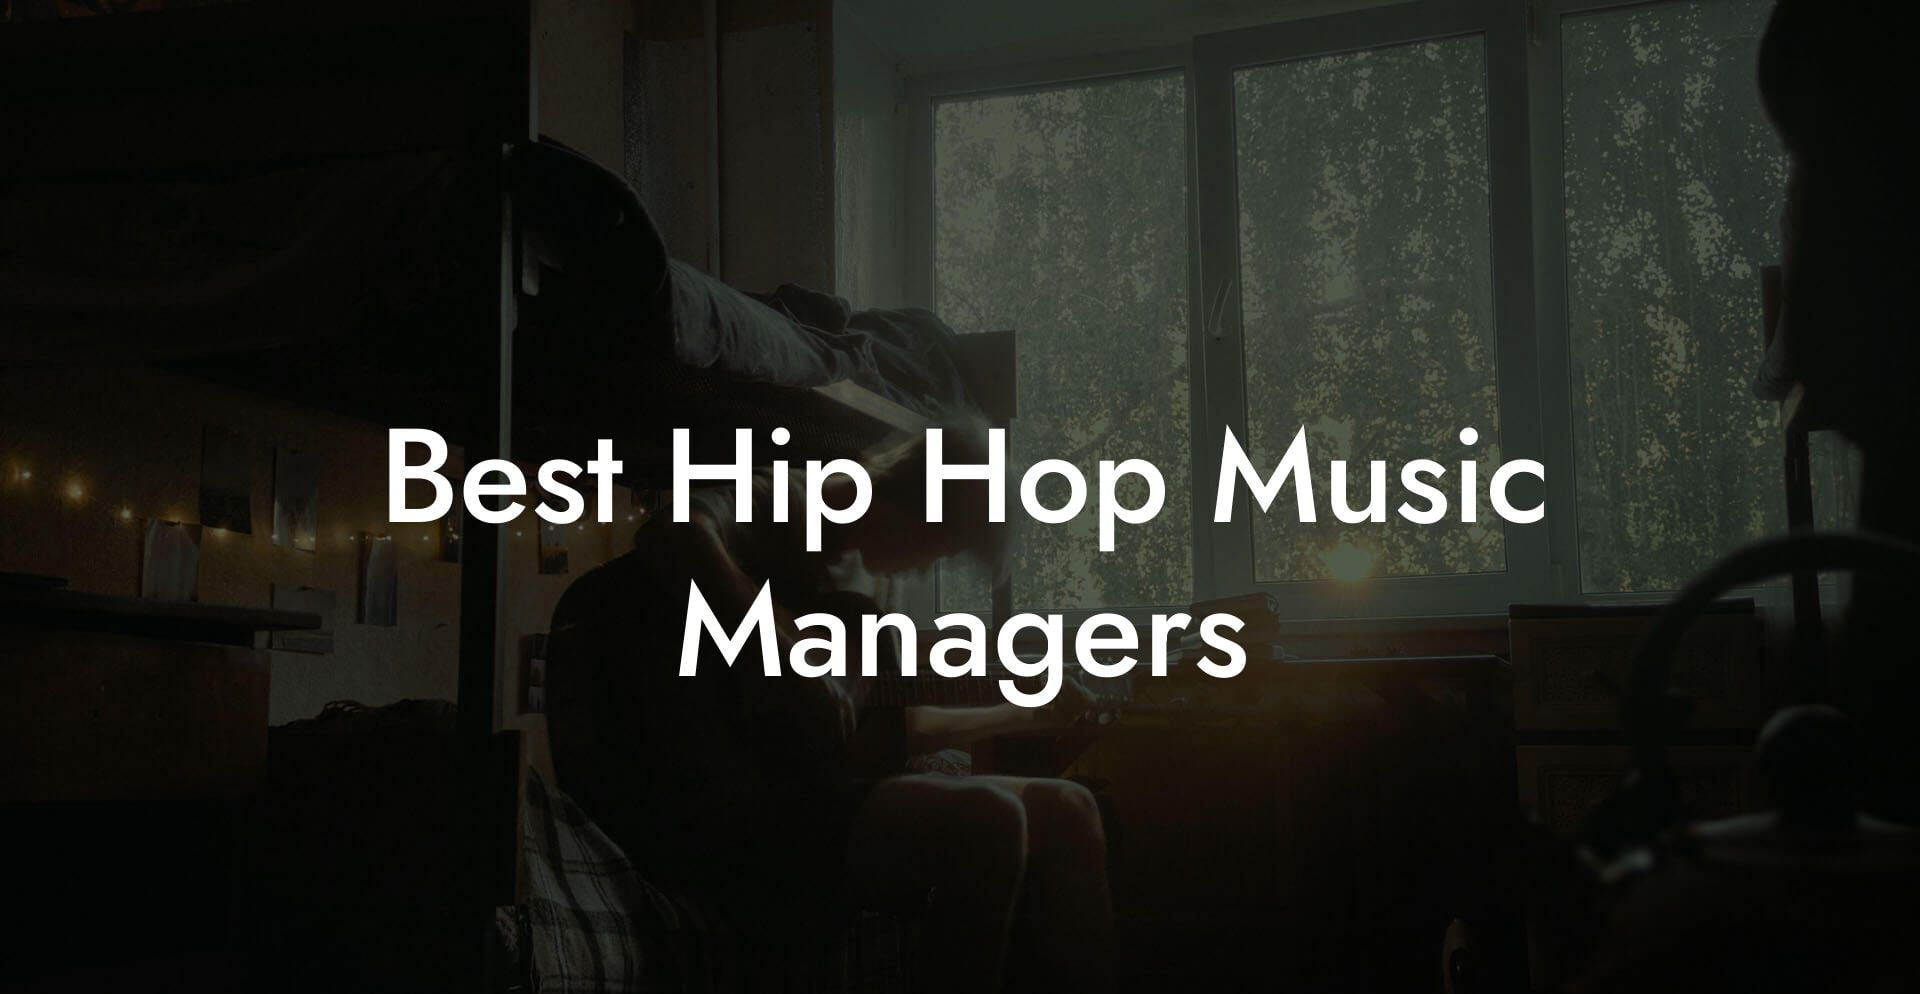 Best Hip Hop Music Managers